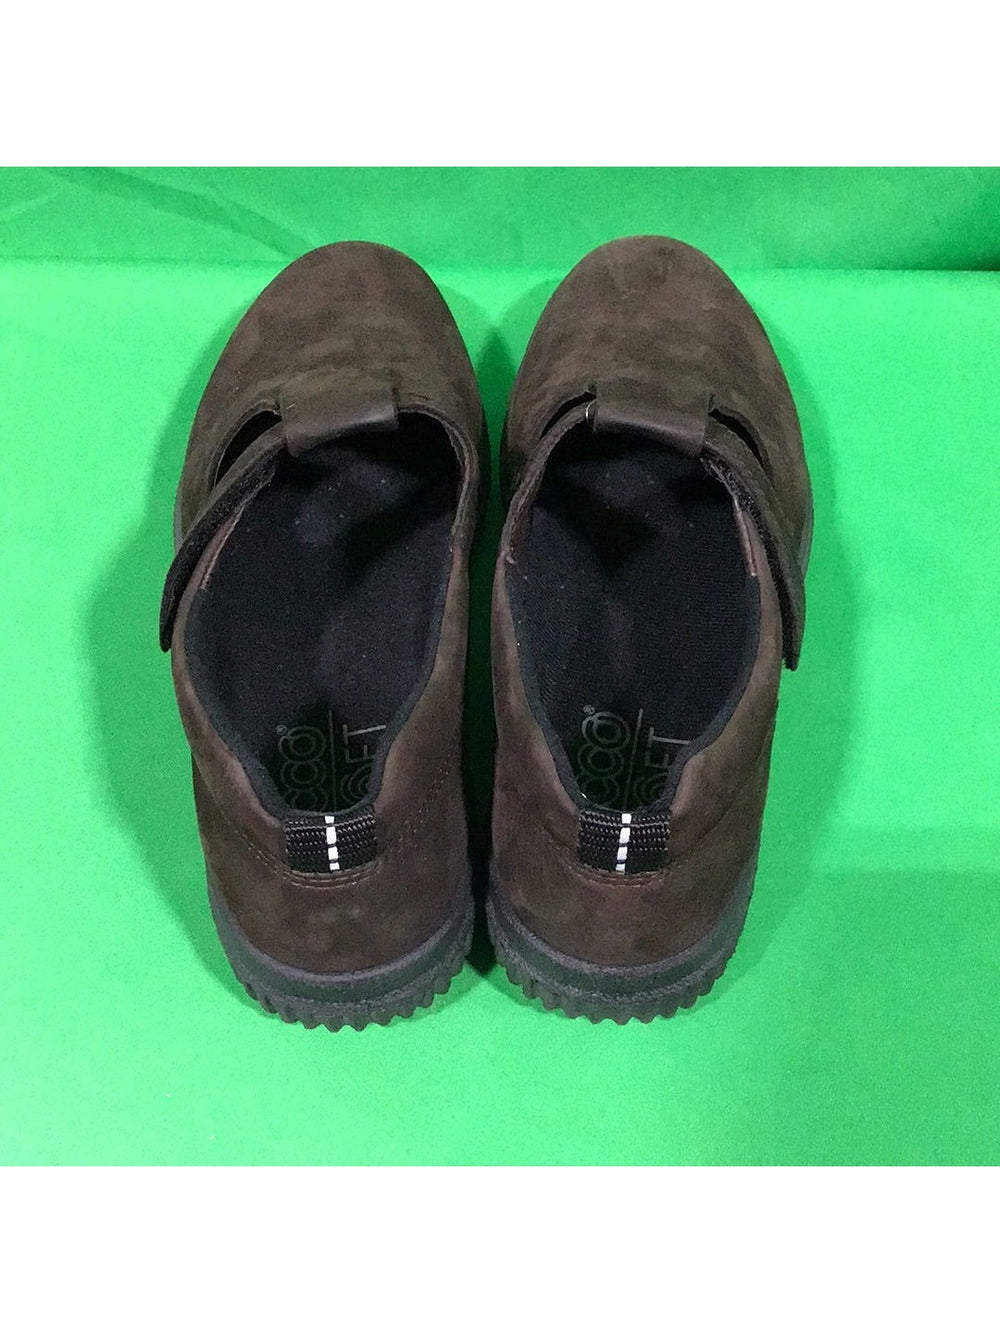 Ecco Soft Men Brown Shoes Size 39 in Box - The Kennedy Collective Thrift - 